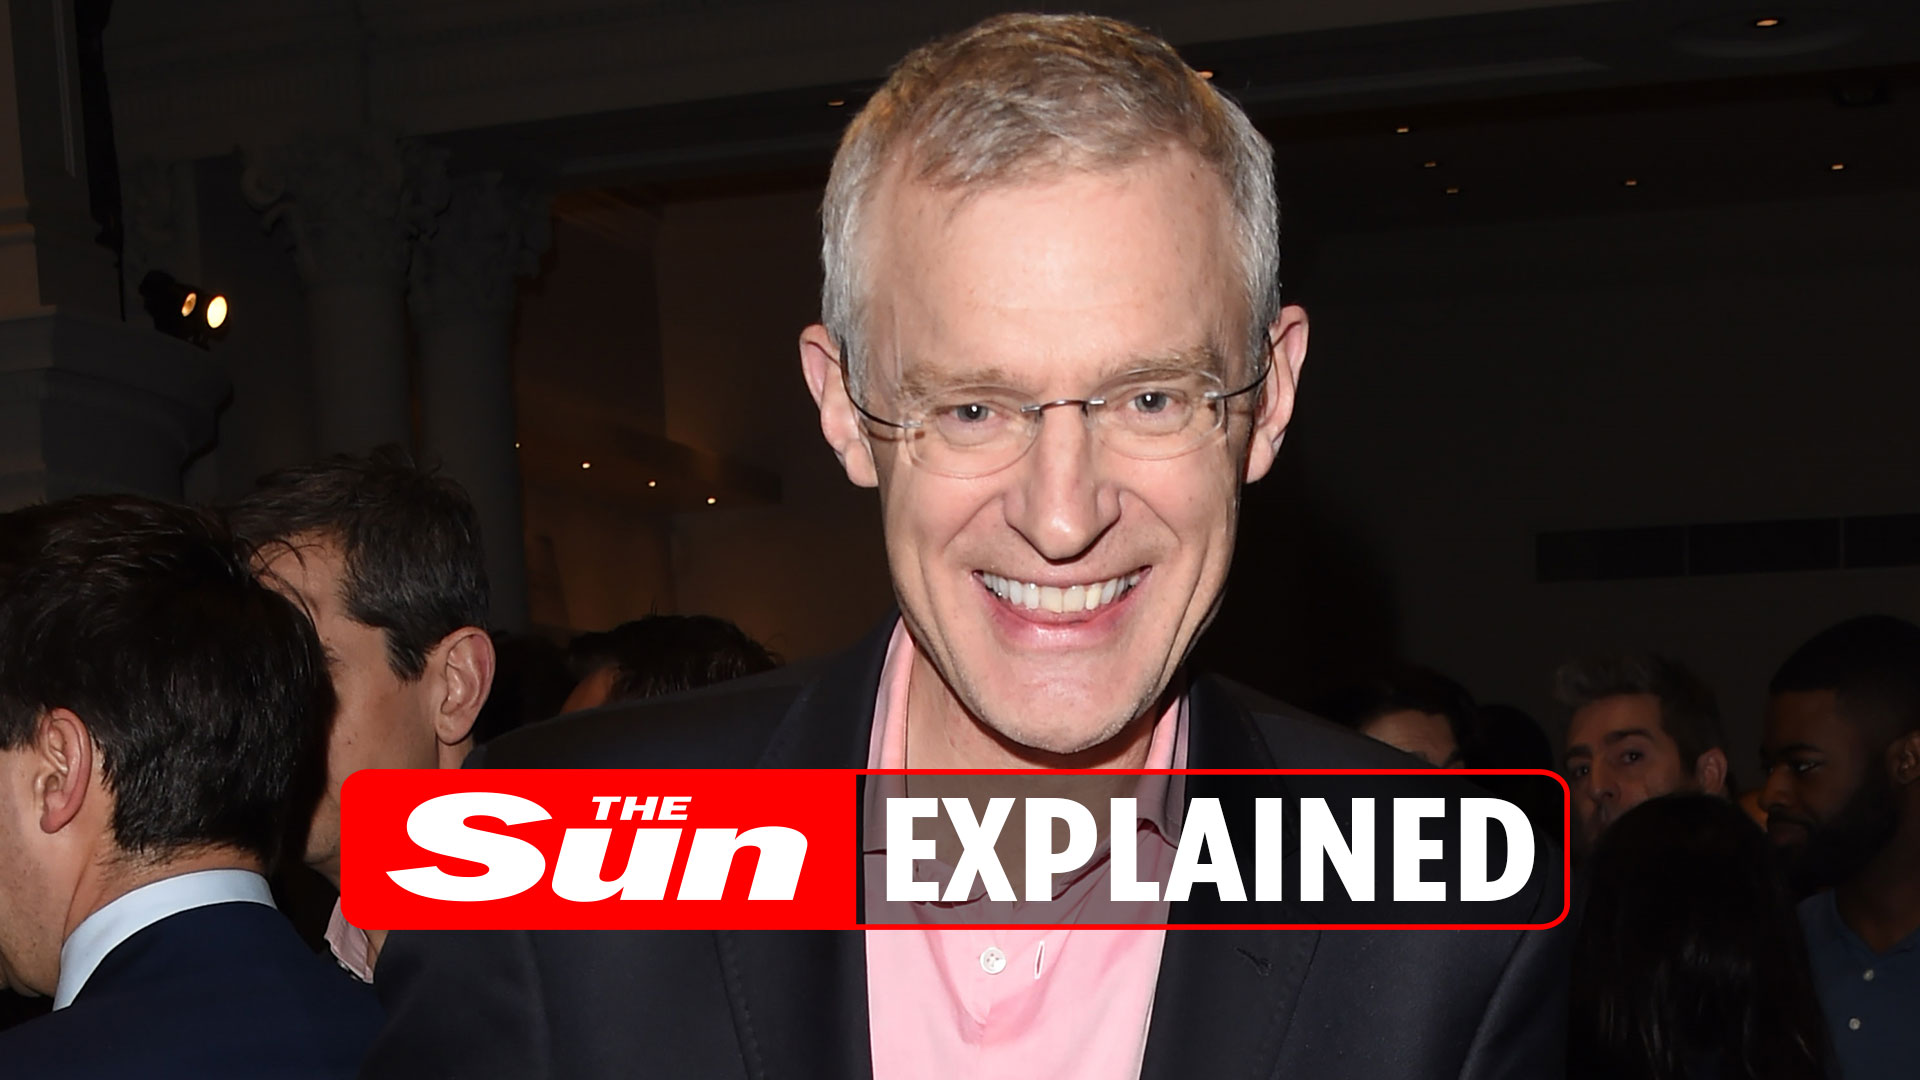 Who is Jeremy Vine? And what is his net worth. – The Sun